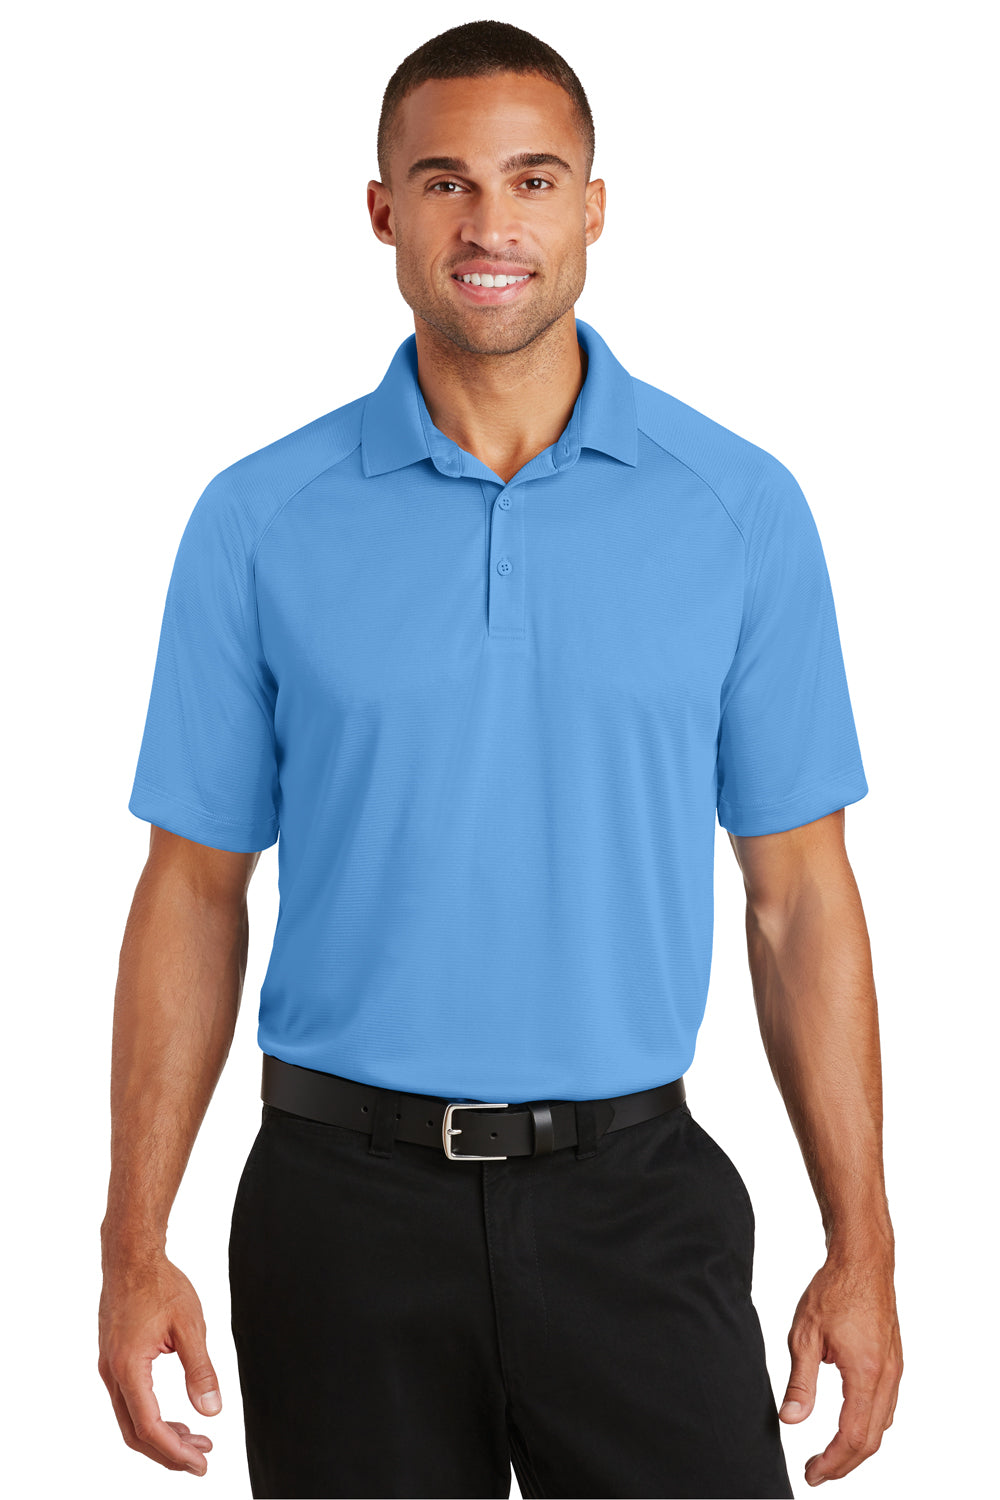 Port Authority K575 Mens Crossover Moisture Wicking Short Sleeve Polo Shirt Azure Blue Front